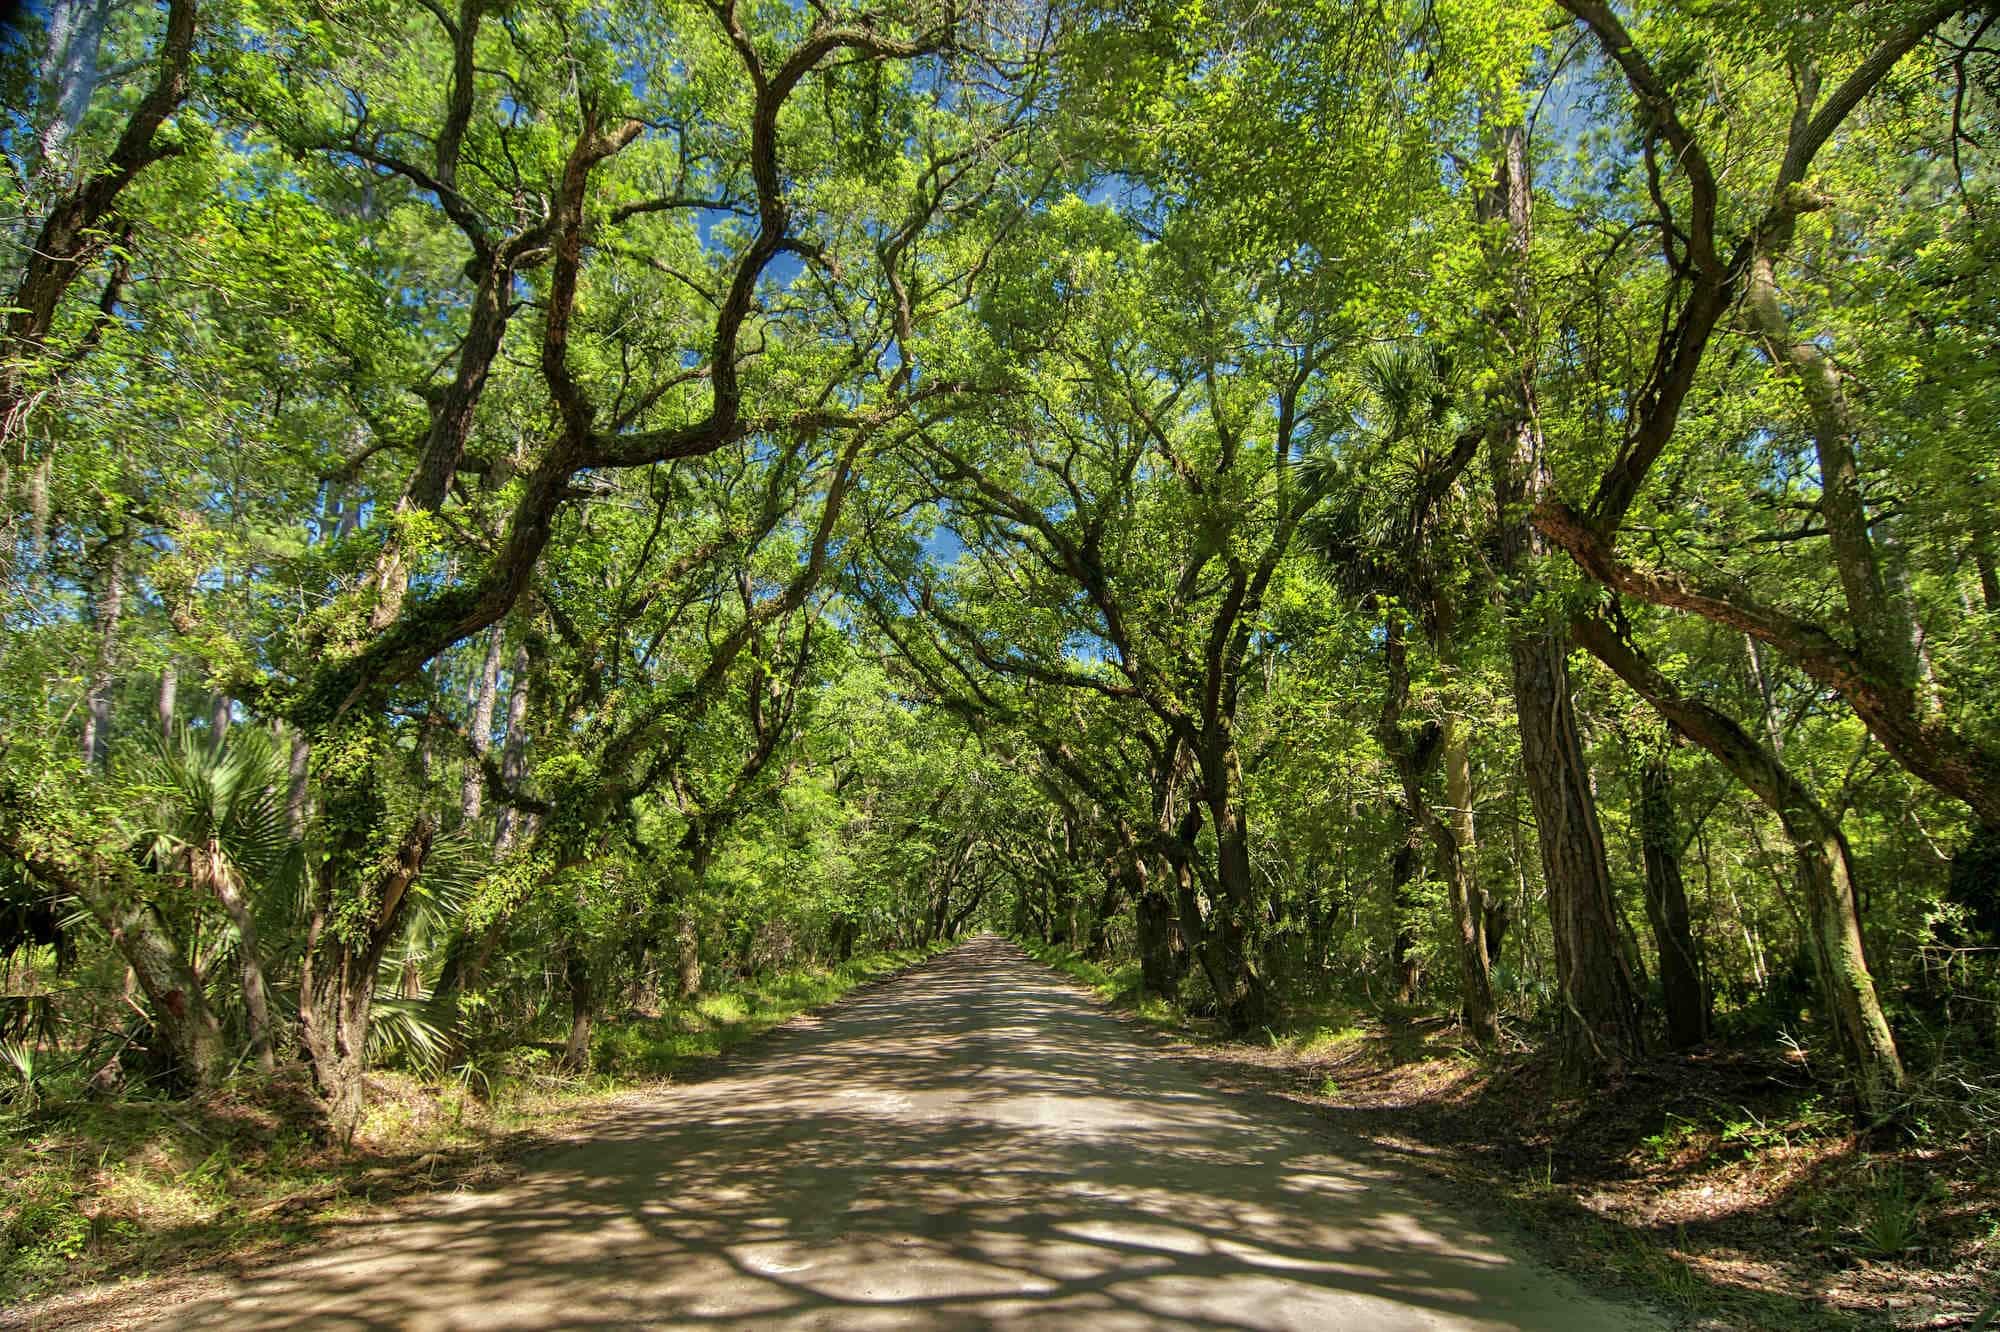 A straight dirt road passes beneath a canopy of green leaves created by oak trees at Botany Bay in South Carolina.